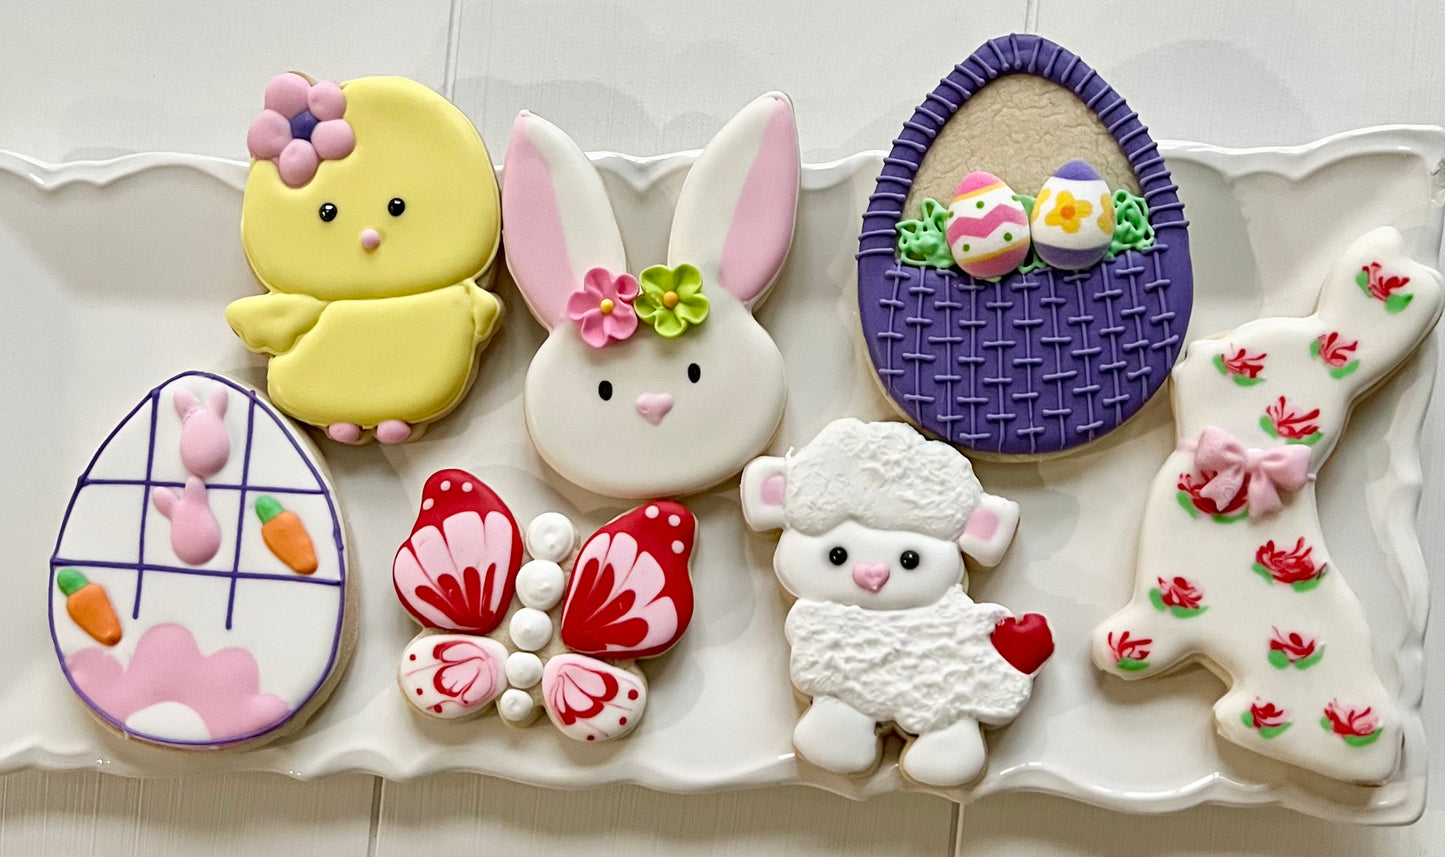 Wednesday 3/29/2023: PRIVATE Sugar Cookie Decorating class - Easter Theme (For Carrie and her group. Total is 12 people)